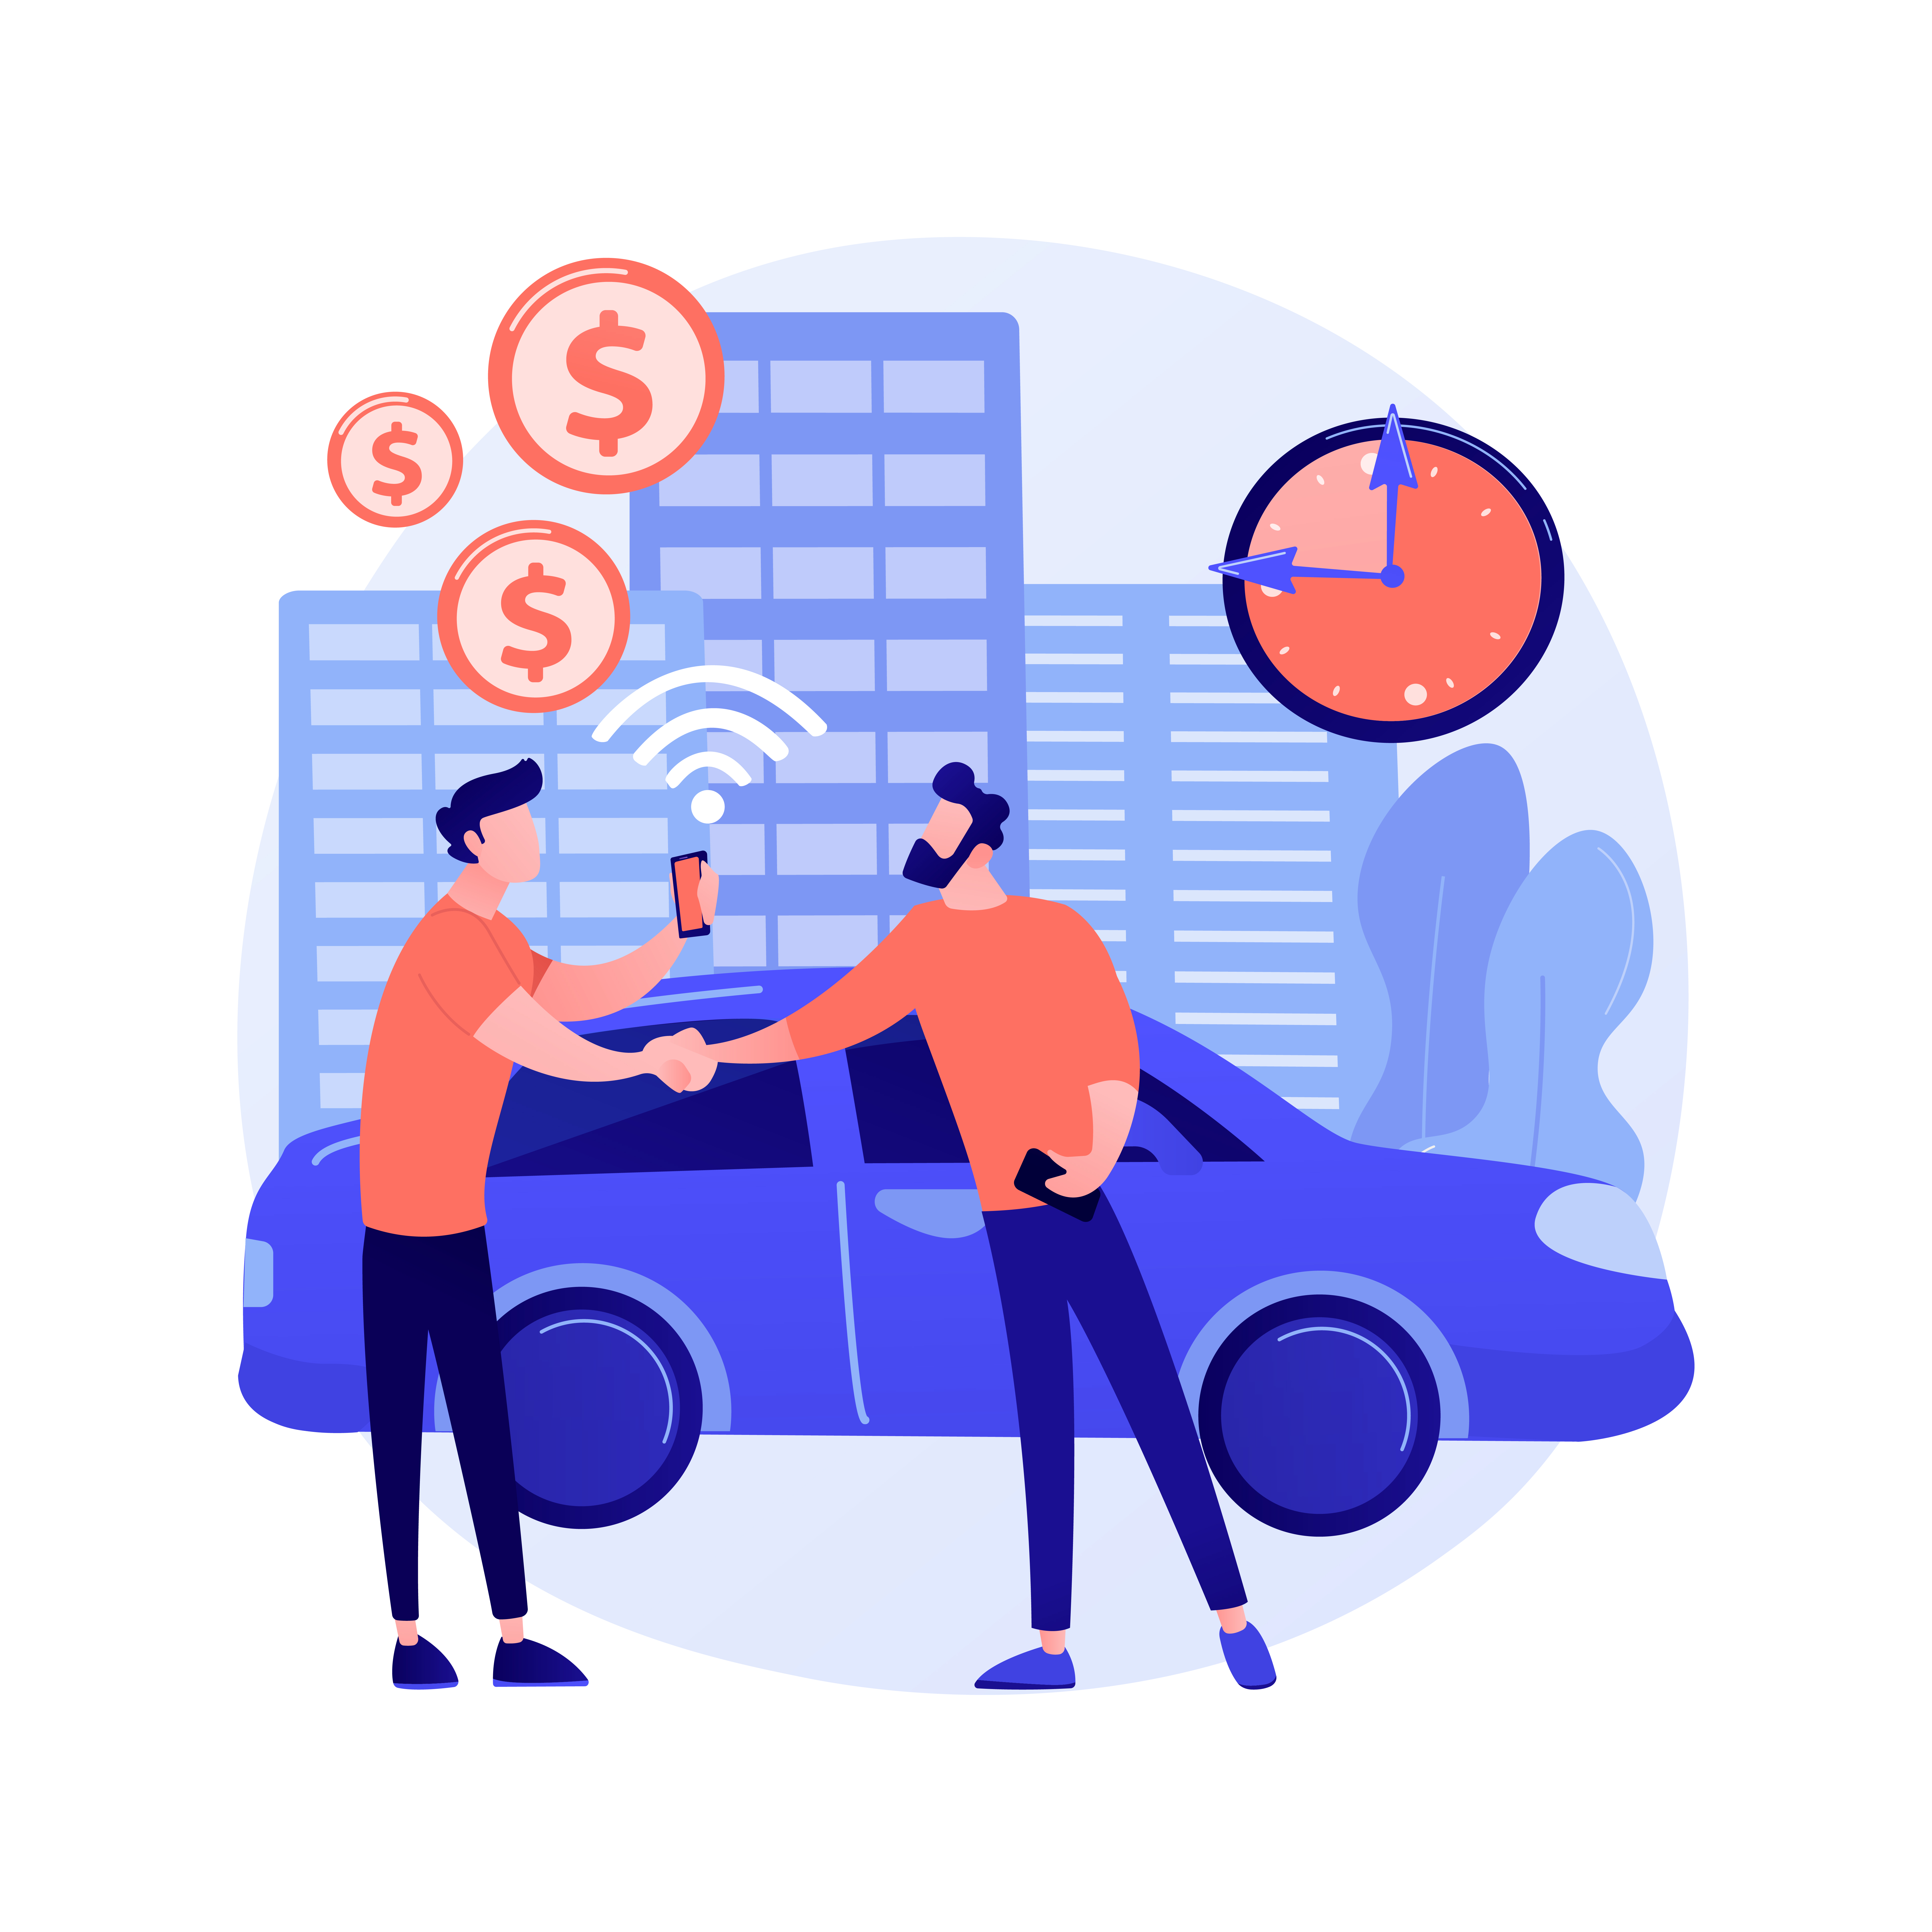 Carsharing service abstract concept vector illustration. Rental service, short term rent, carsharing application, ride application, hiring a car peer to peer, hourly payment abstract metaphor.